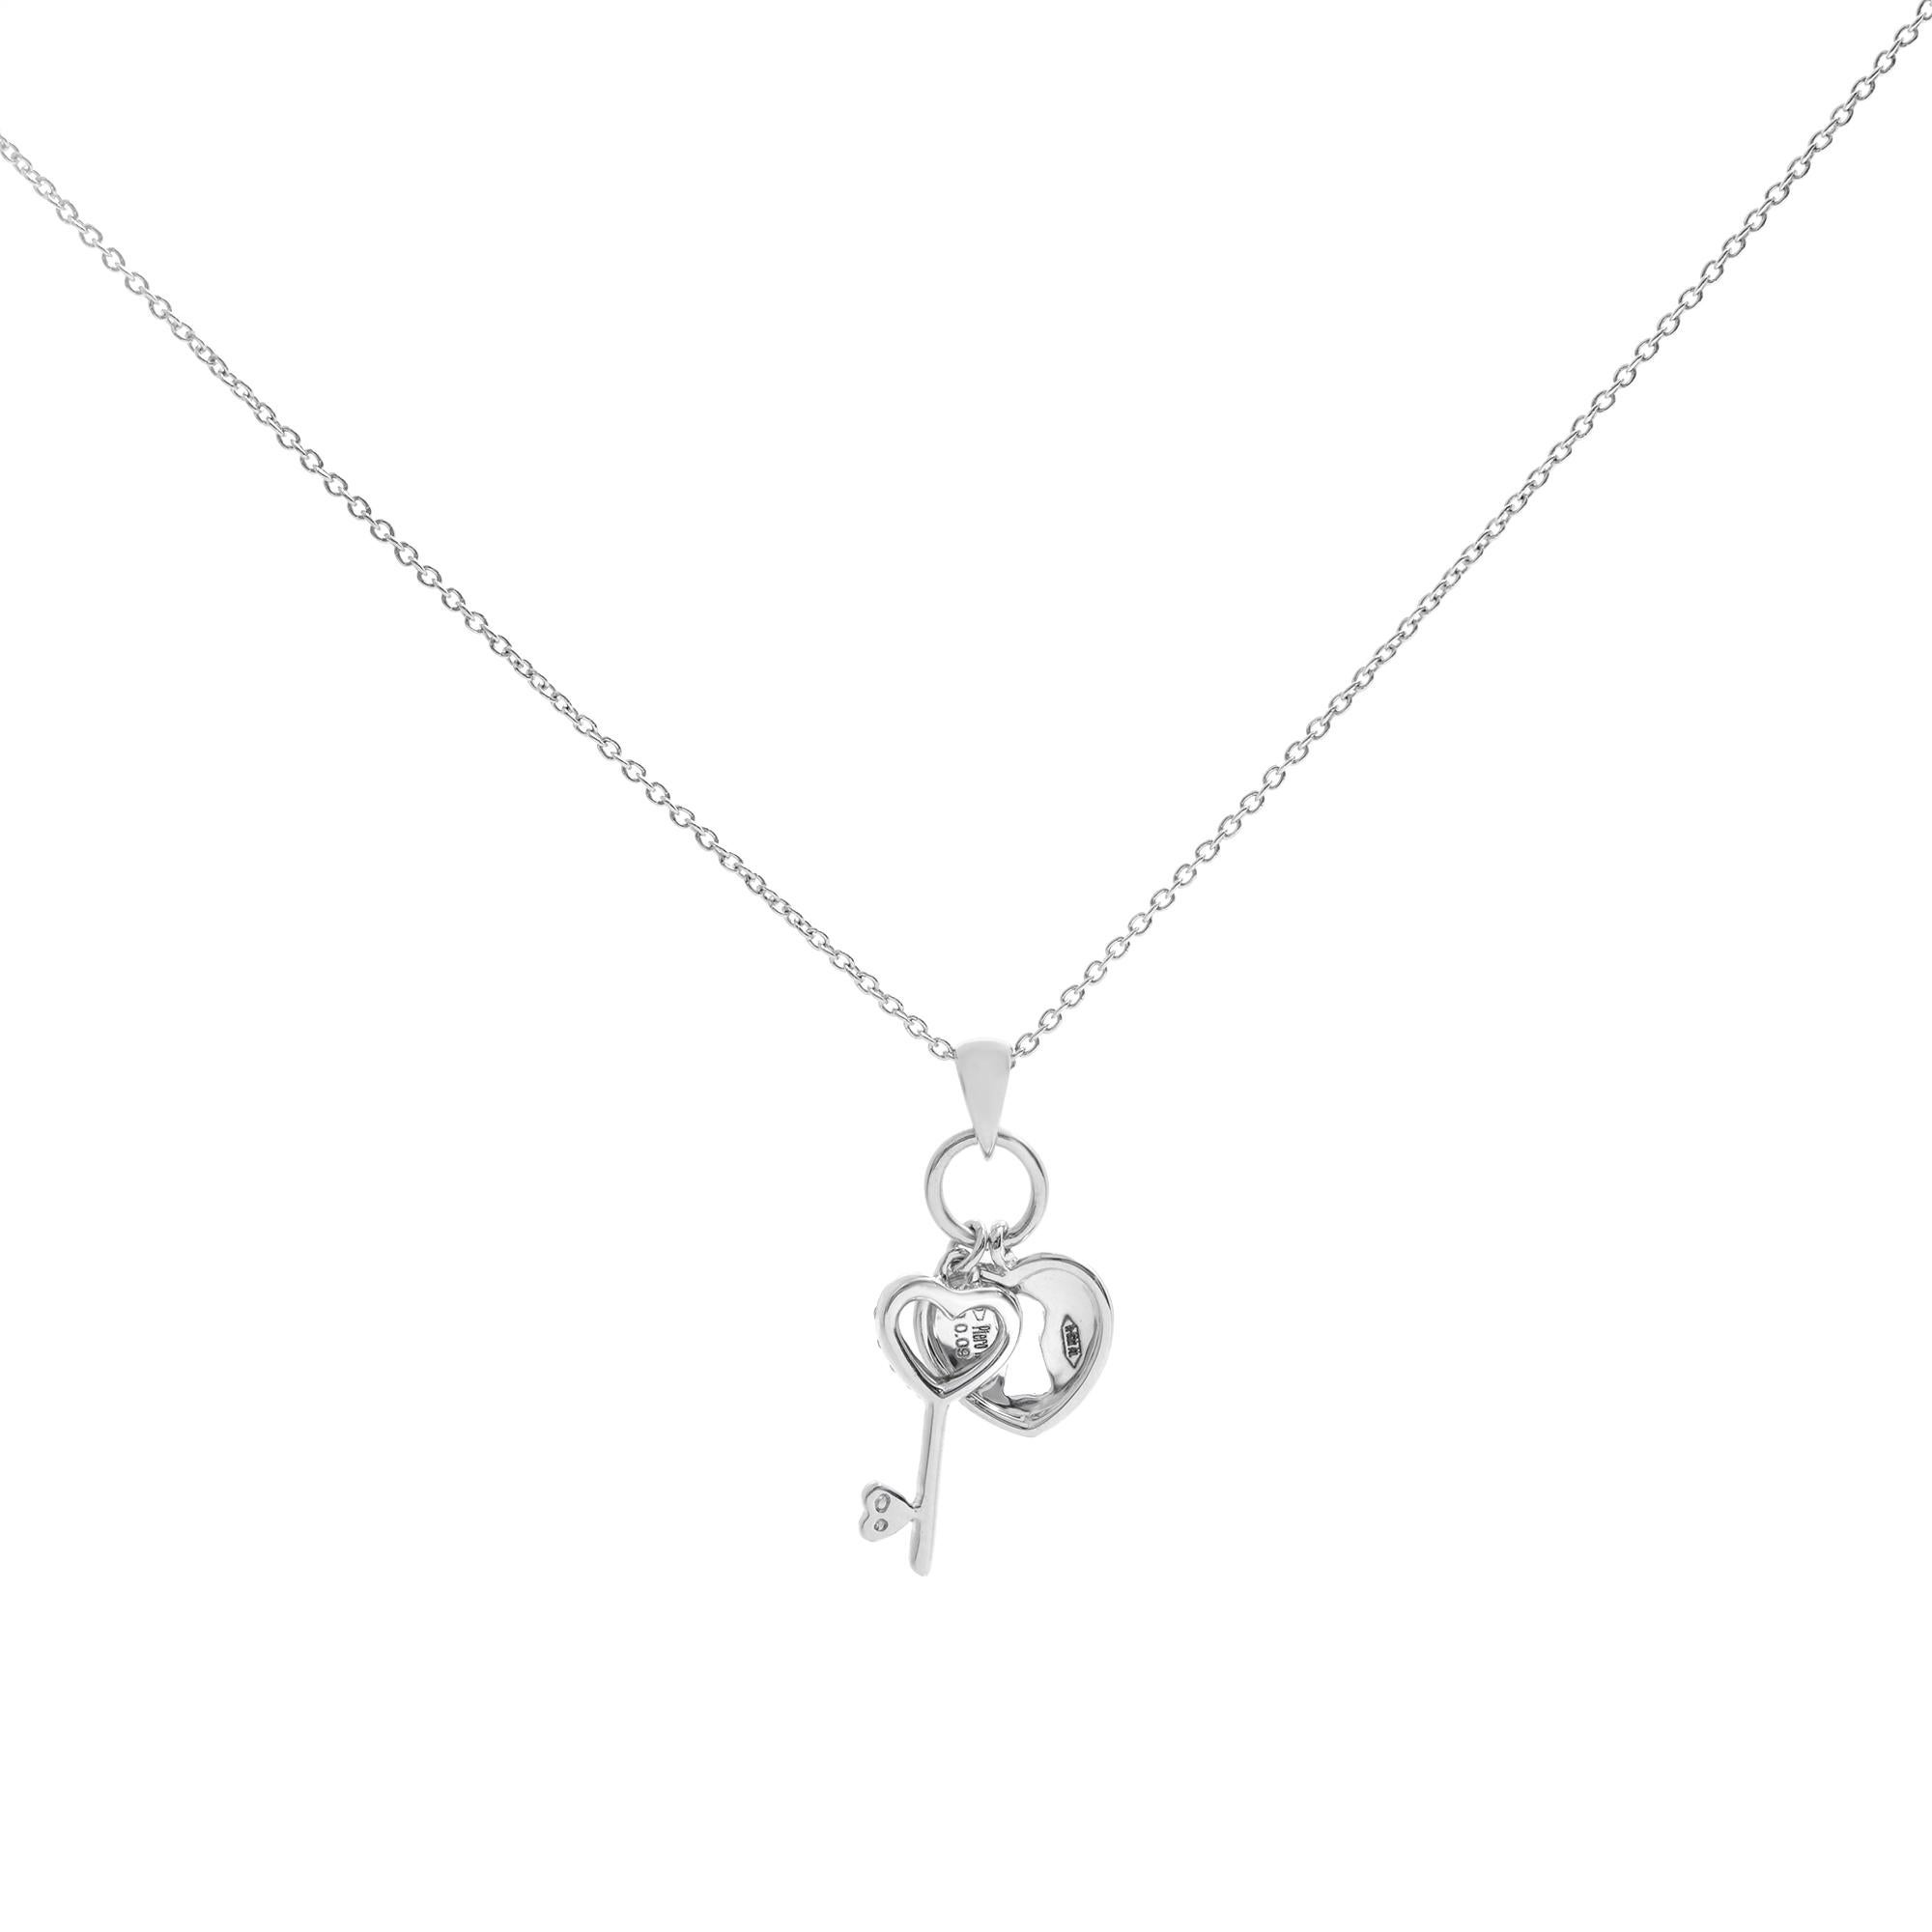 This is an 18k White Gold Piero Milano Heart Lock & Key Necklace. Sparkling Round Diamonds Adorn the Dangling Key along with a White Gold Heart Necklace. Crafted of 18K White Gold, the Pendant has a total Diamond Weight of 0.09 cttw, 16 inches long,